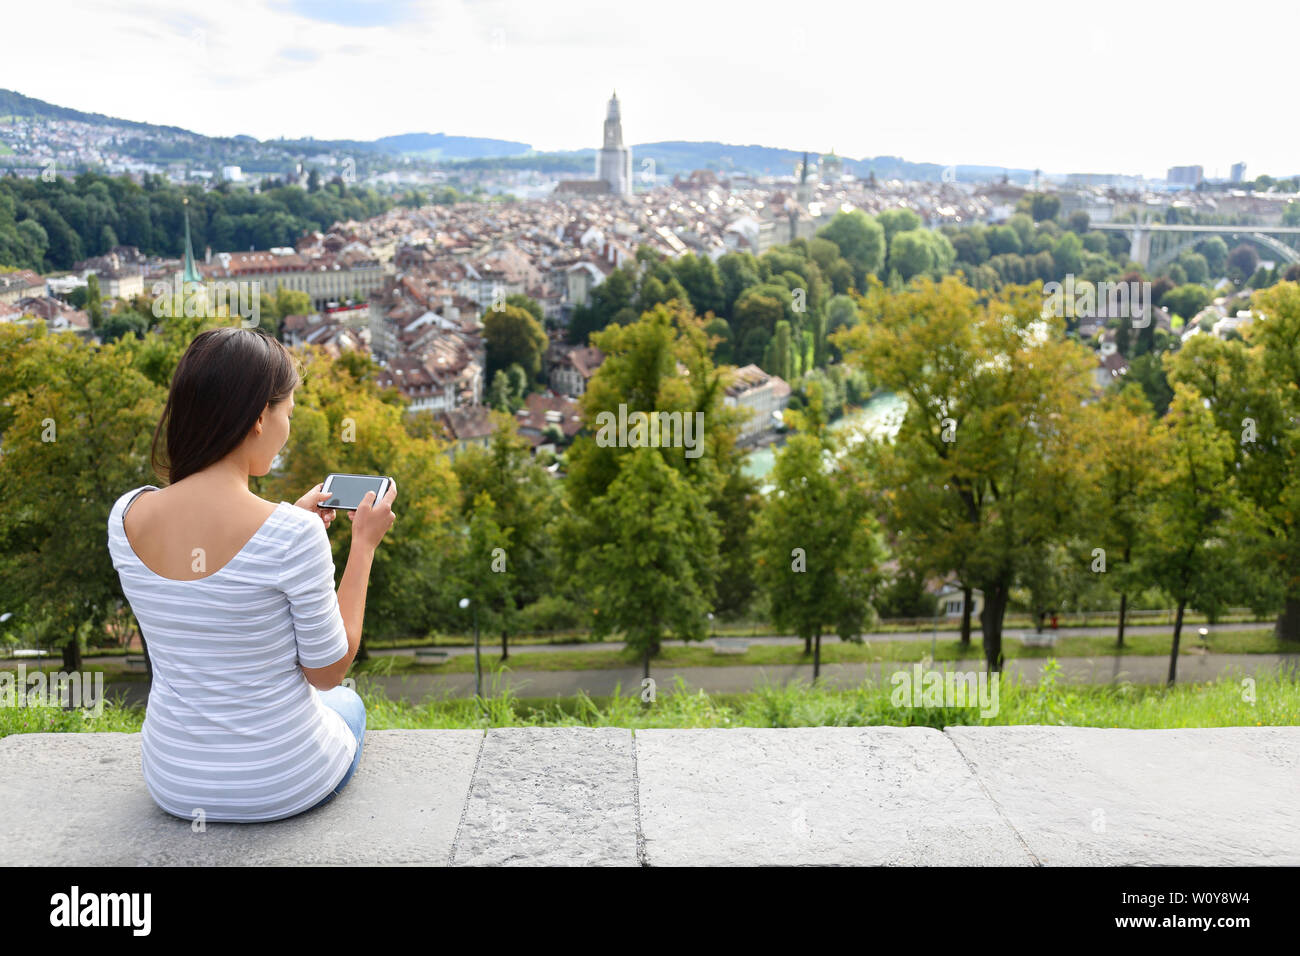 Tourist with smart phone camera in Bern, Switzerland at Rosengarten, the Rose Garden view. Woman taking photograph with smartphone at enjoying view of Berne landmarks and tourist attractions. Stock Photo